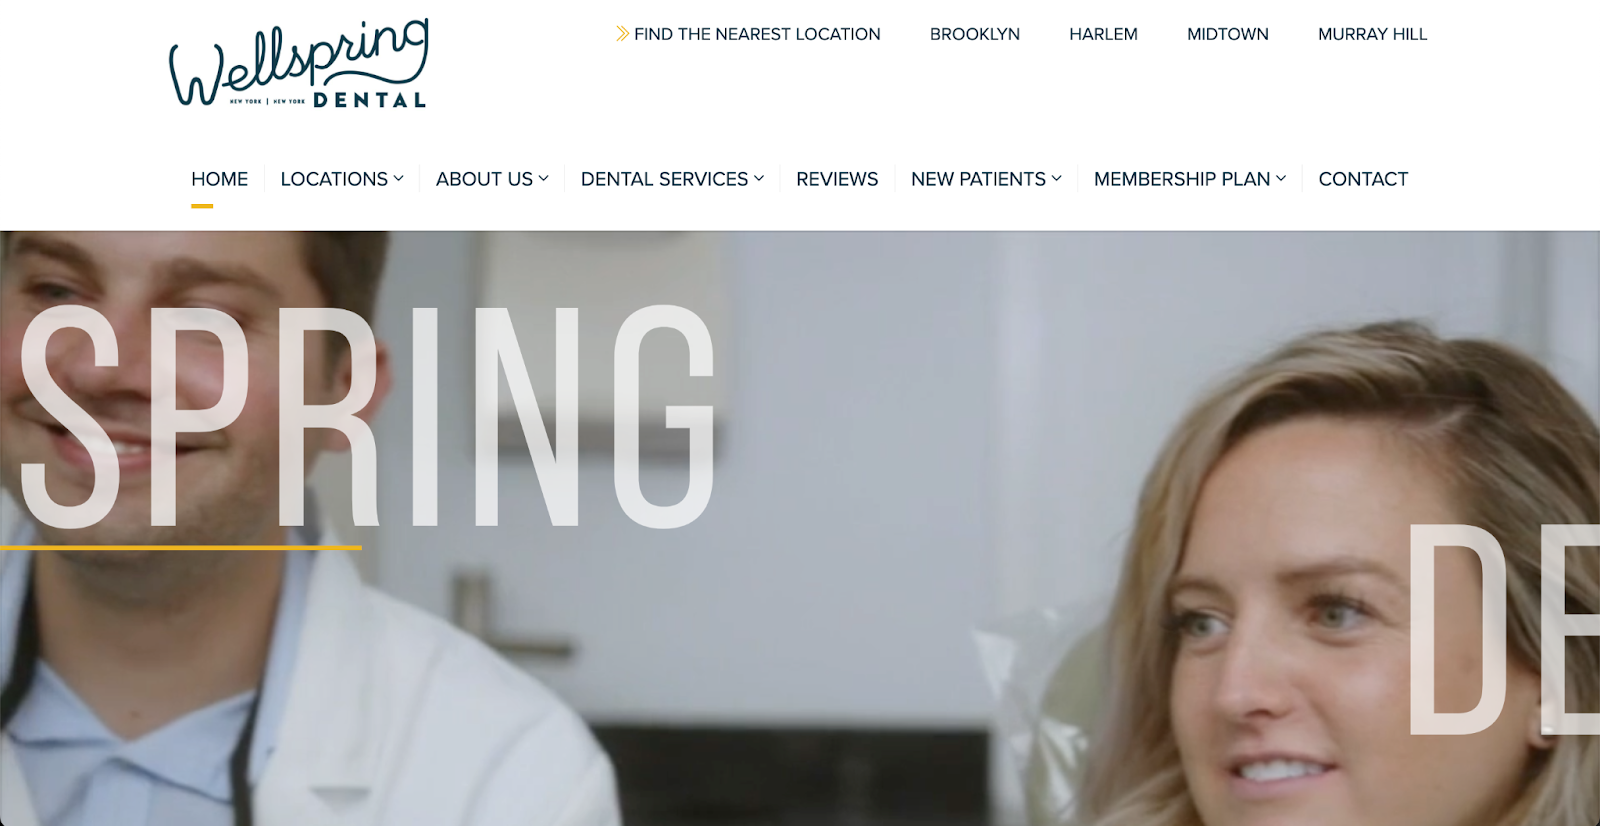 The Wellspring branding is carried through to its digital experience, shown here in our roundup of dental websites